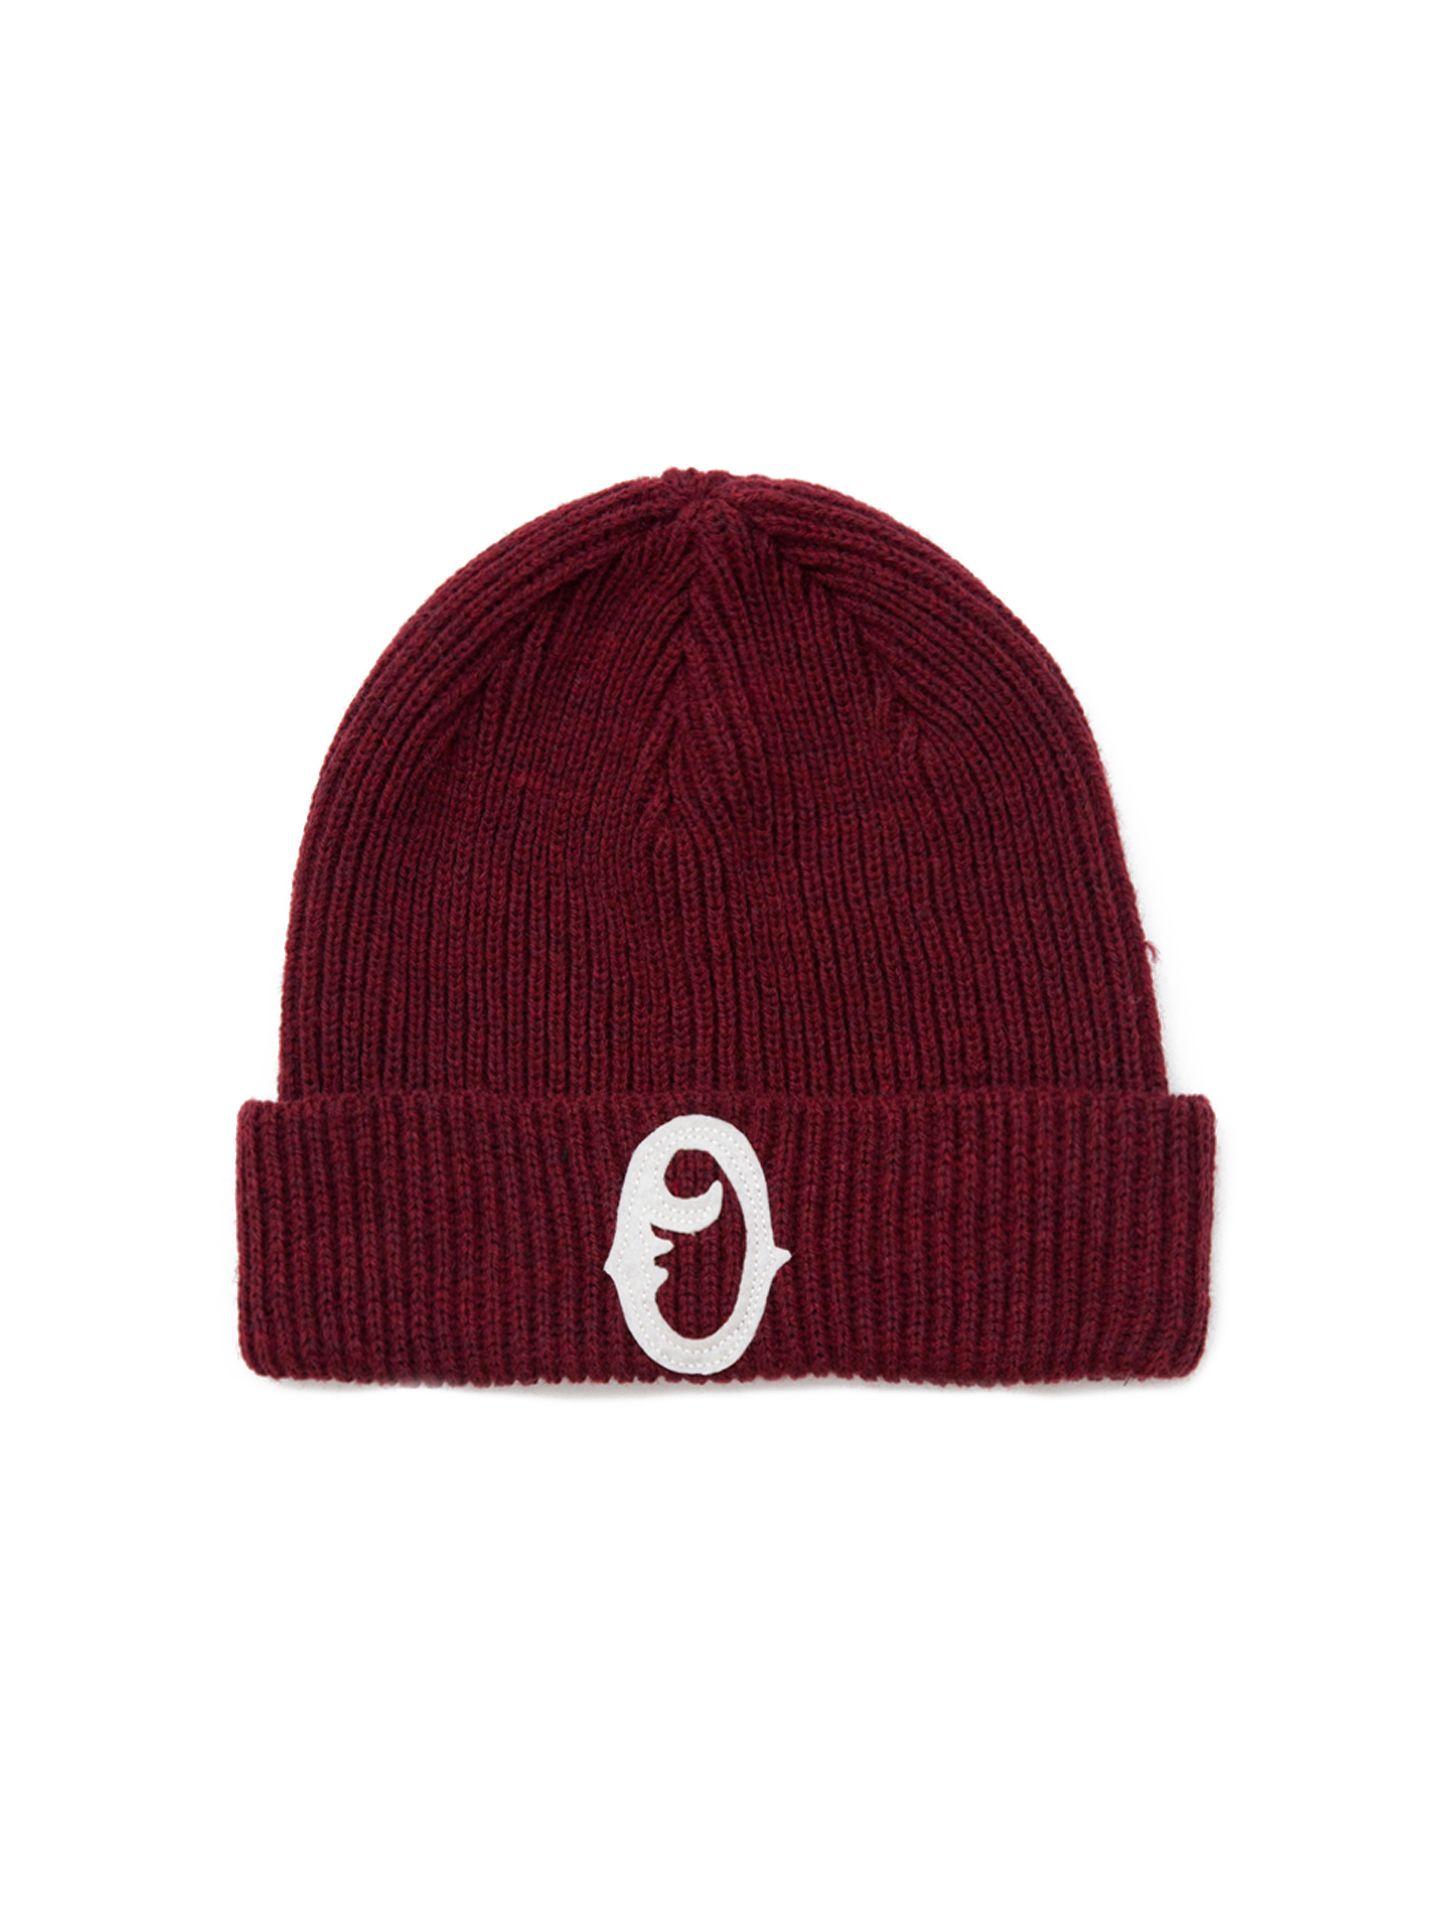 OBEY Clothing Old Logo - Old Timers Beanie - Obey Clothing UK